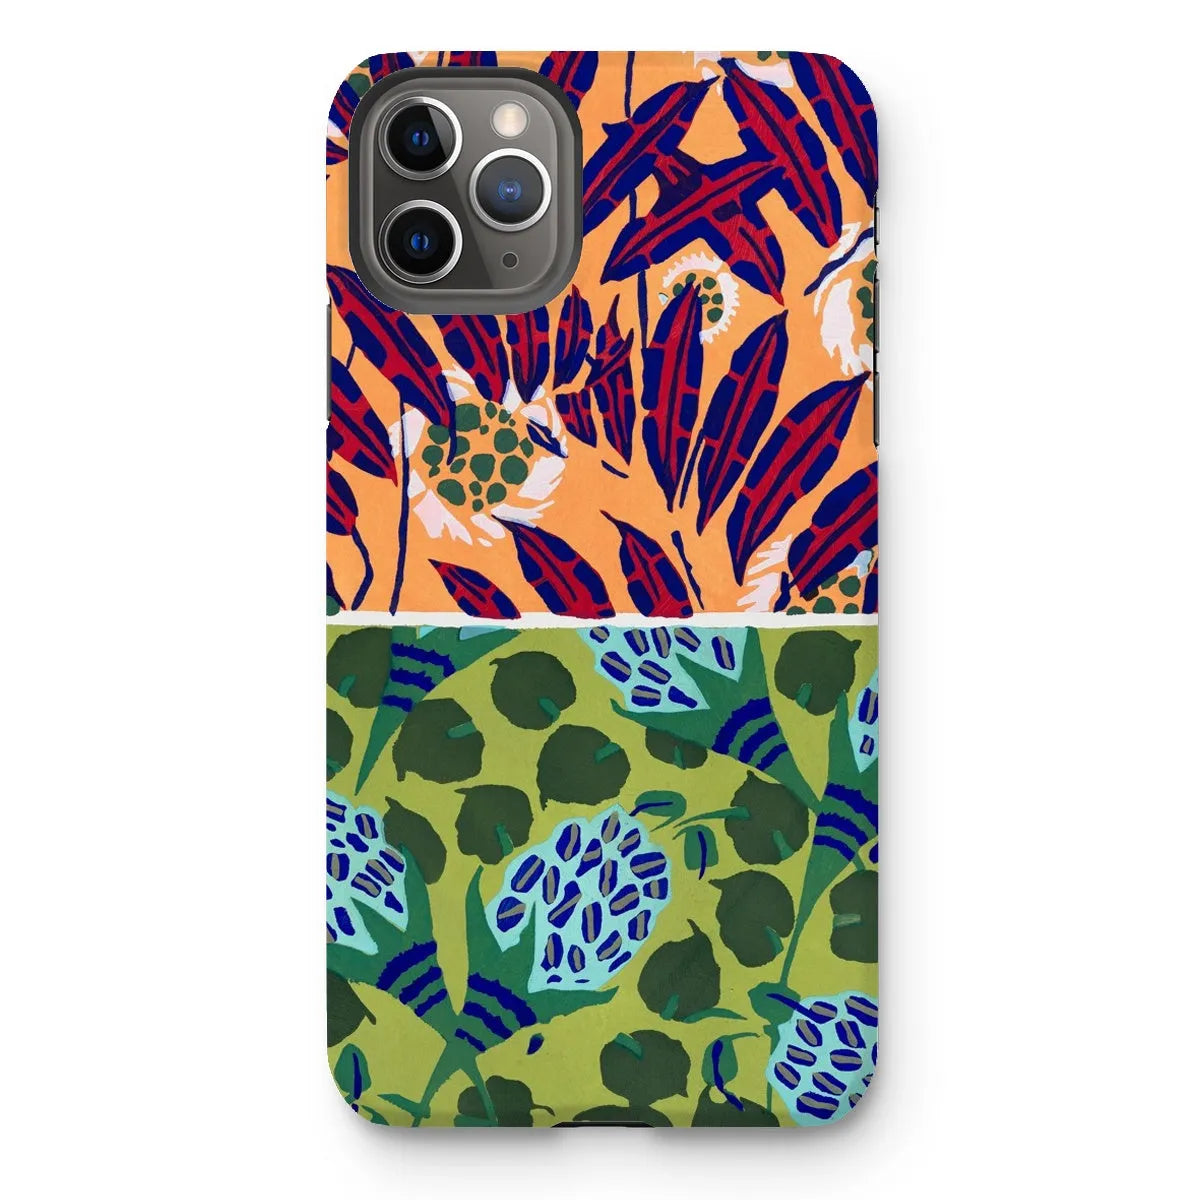 Fabric & Rugs Too - Pochoir Pattern Phone Case - E. A. Séguy - Iphone 11 Pro Max / Matte - Mobile Phone Cases